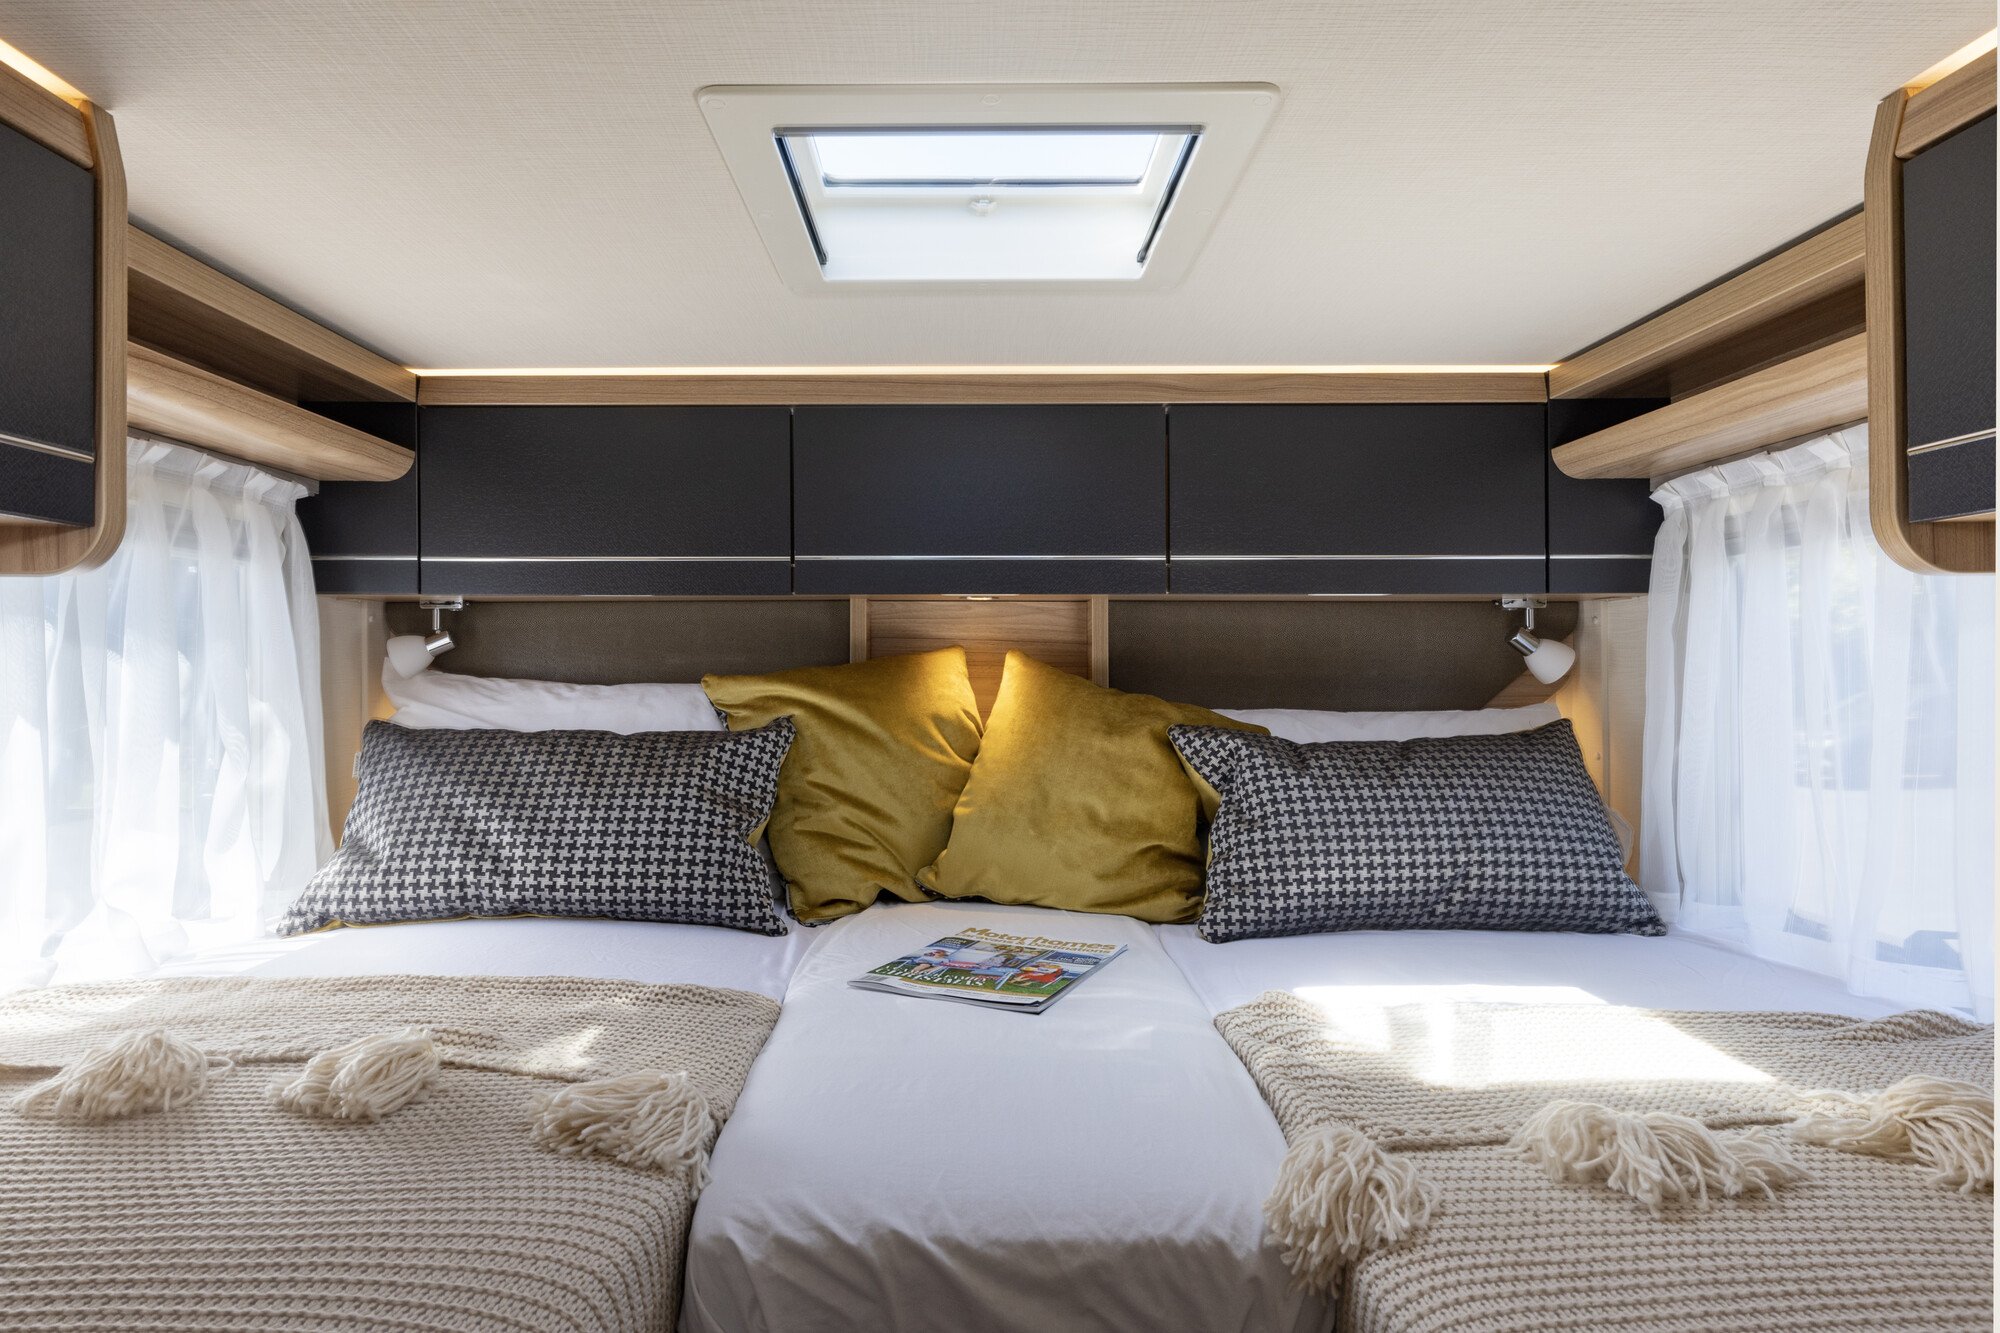 Hymer bed